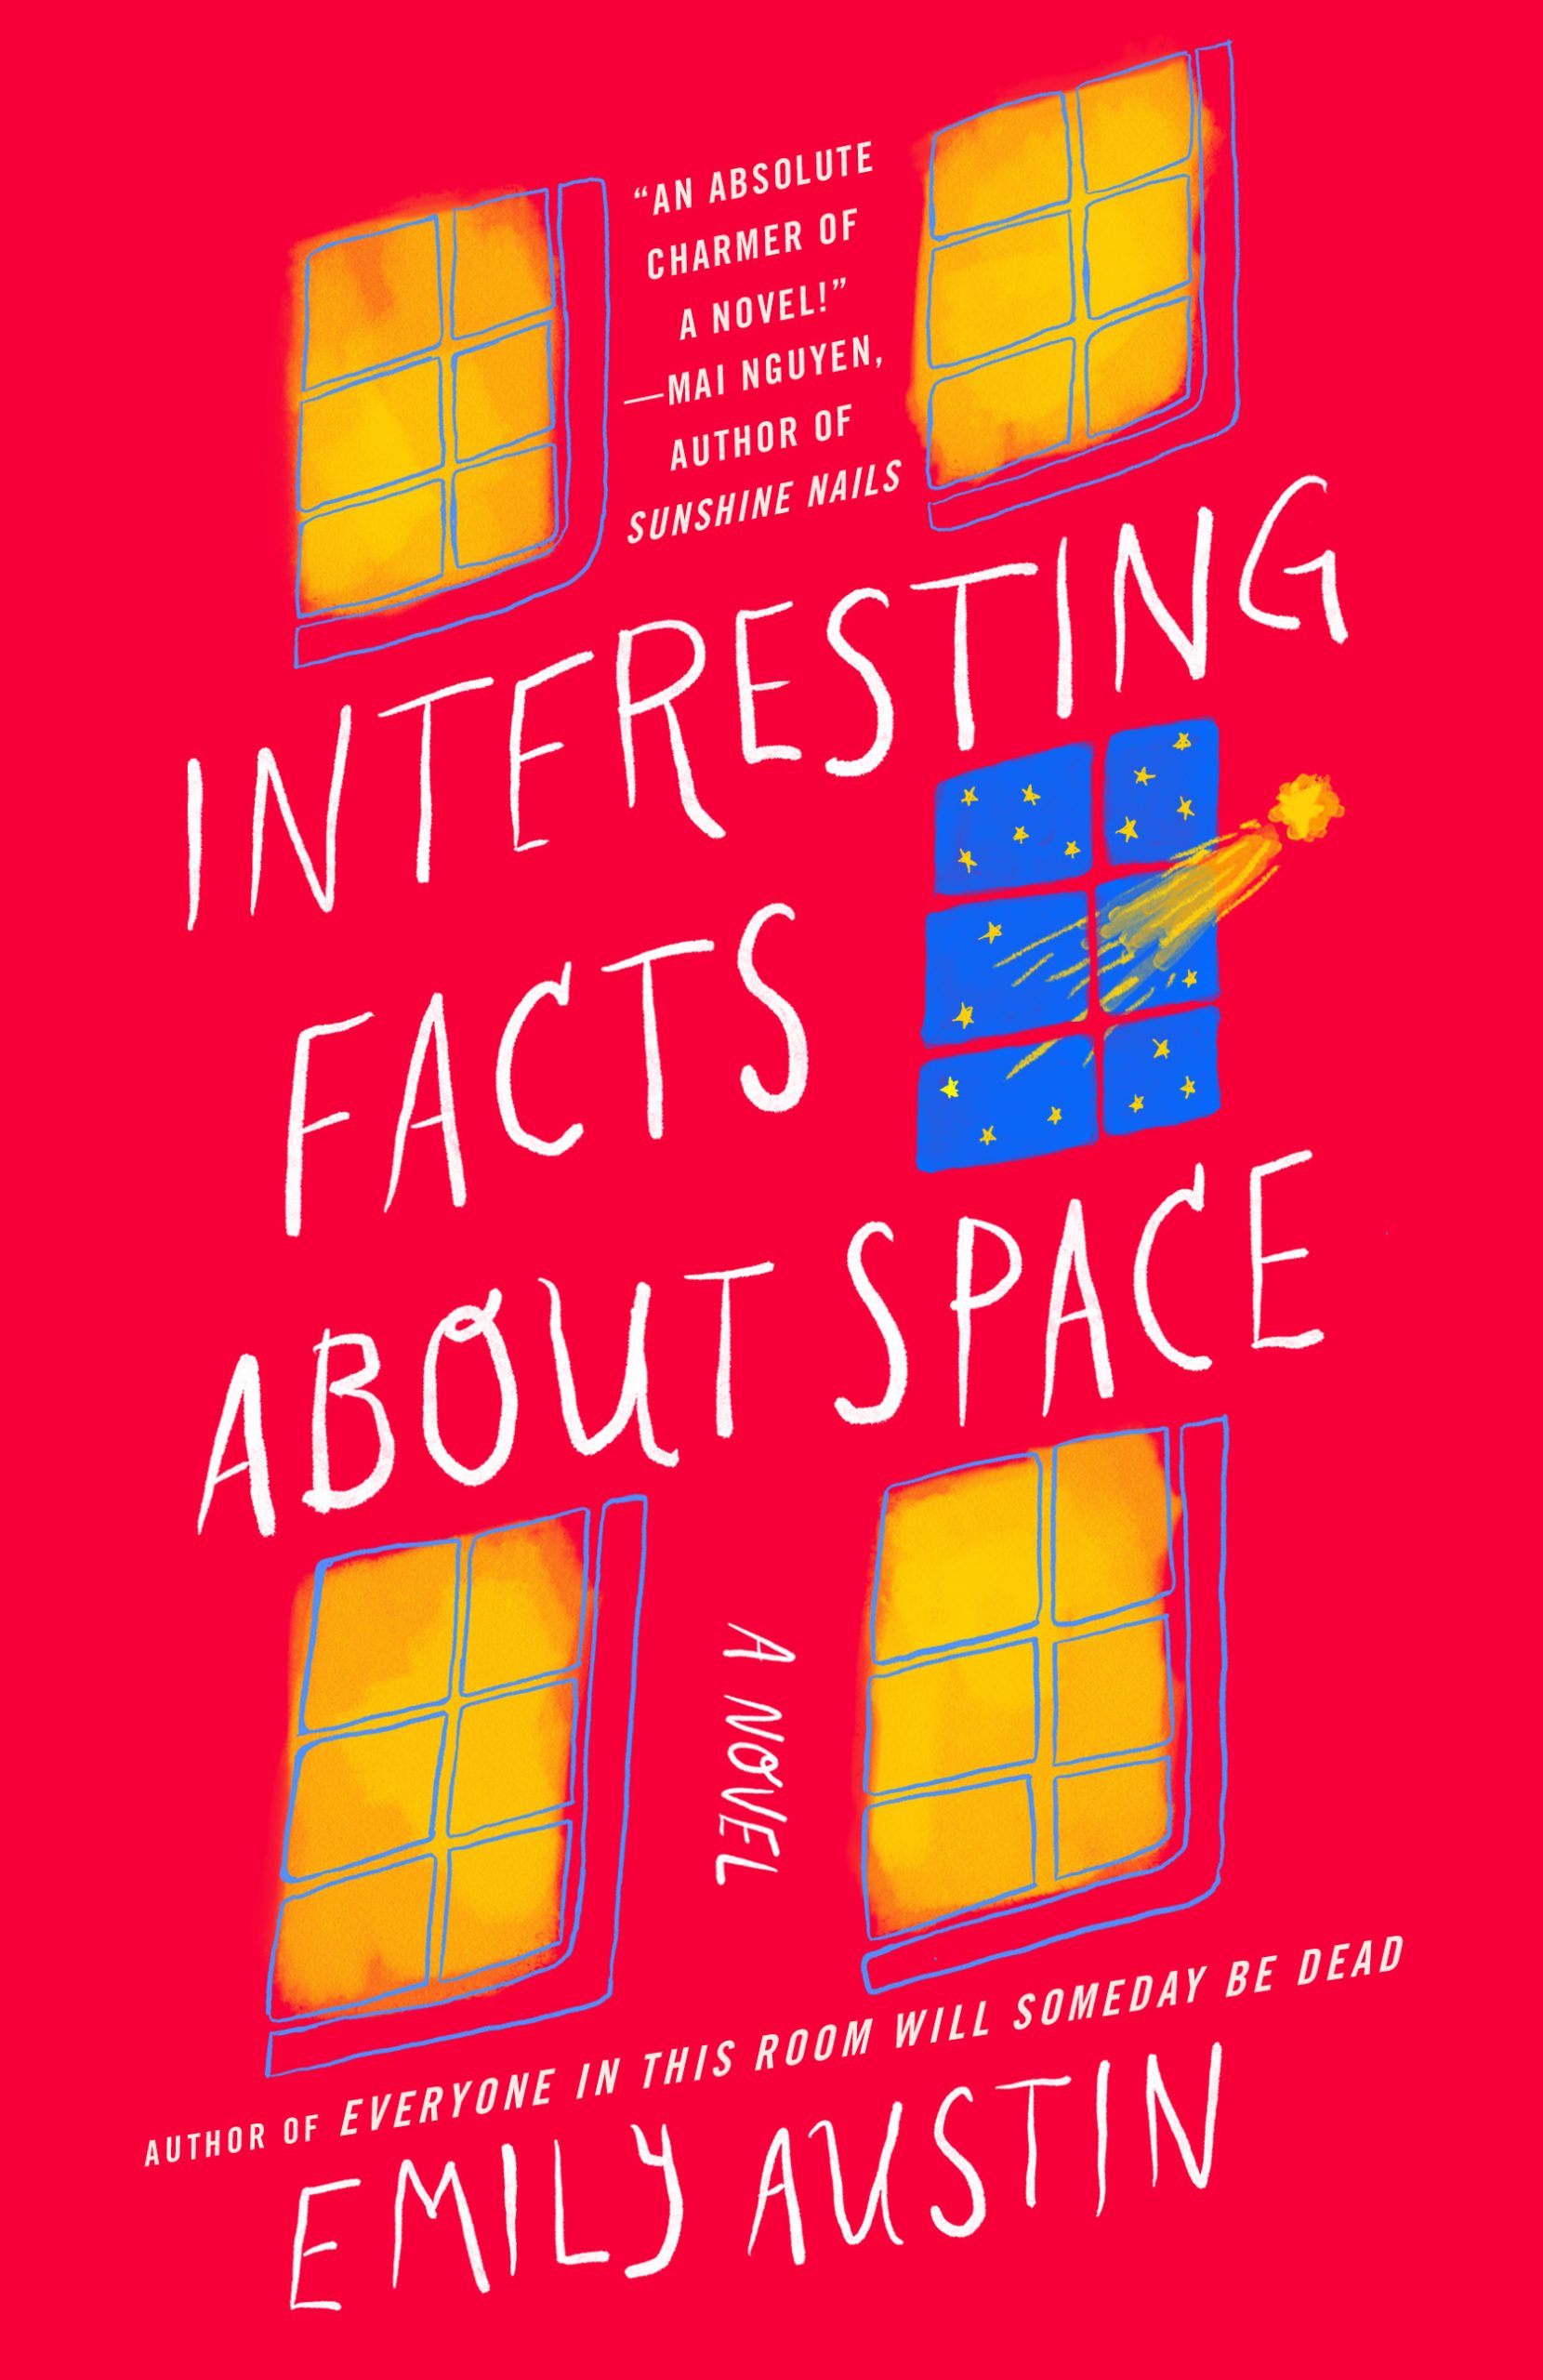 Interesting Facts About Space by Emily Austin